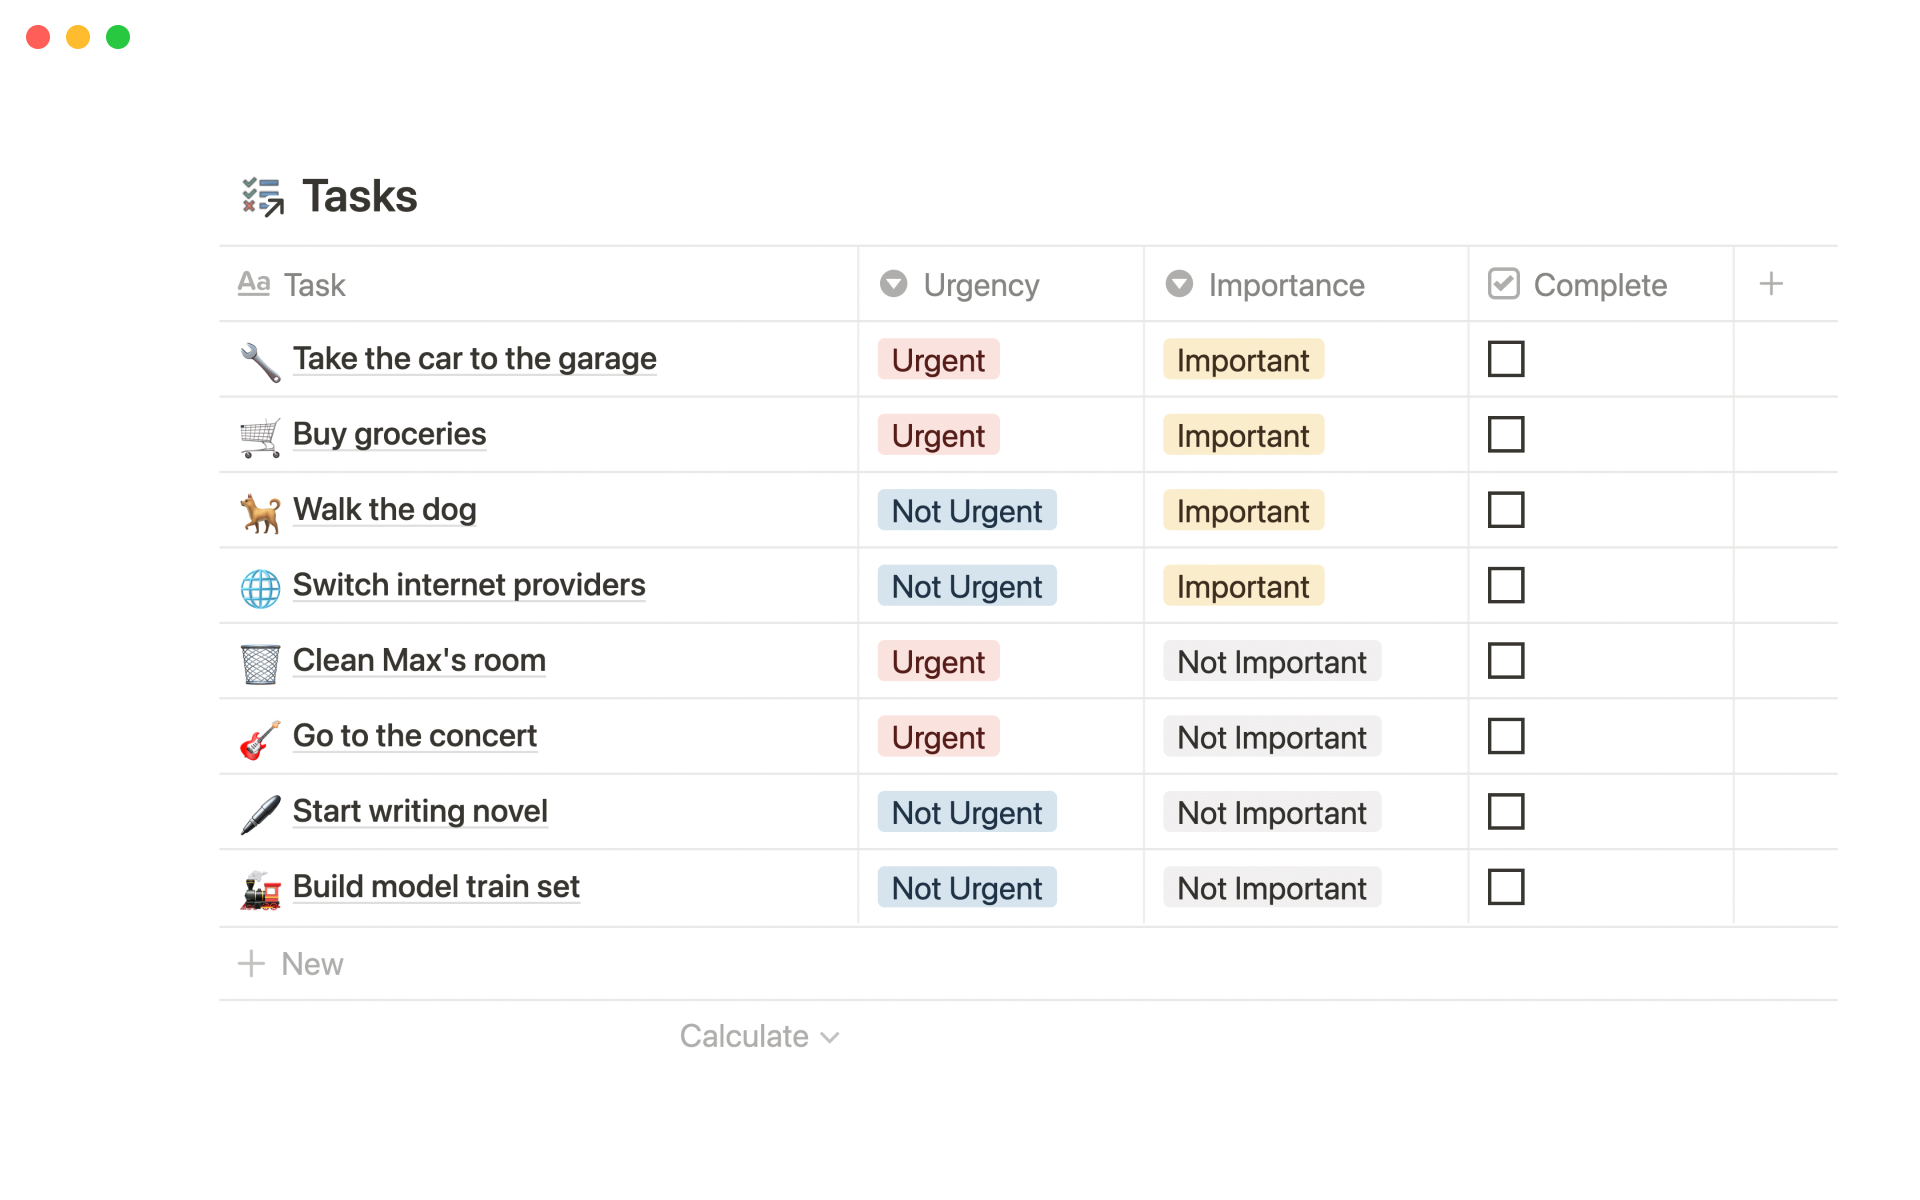 Organize your tasks to make sure that you work on what's important and not just what's urgent.